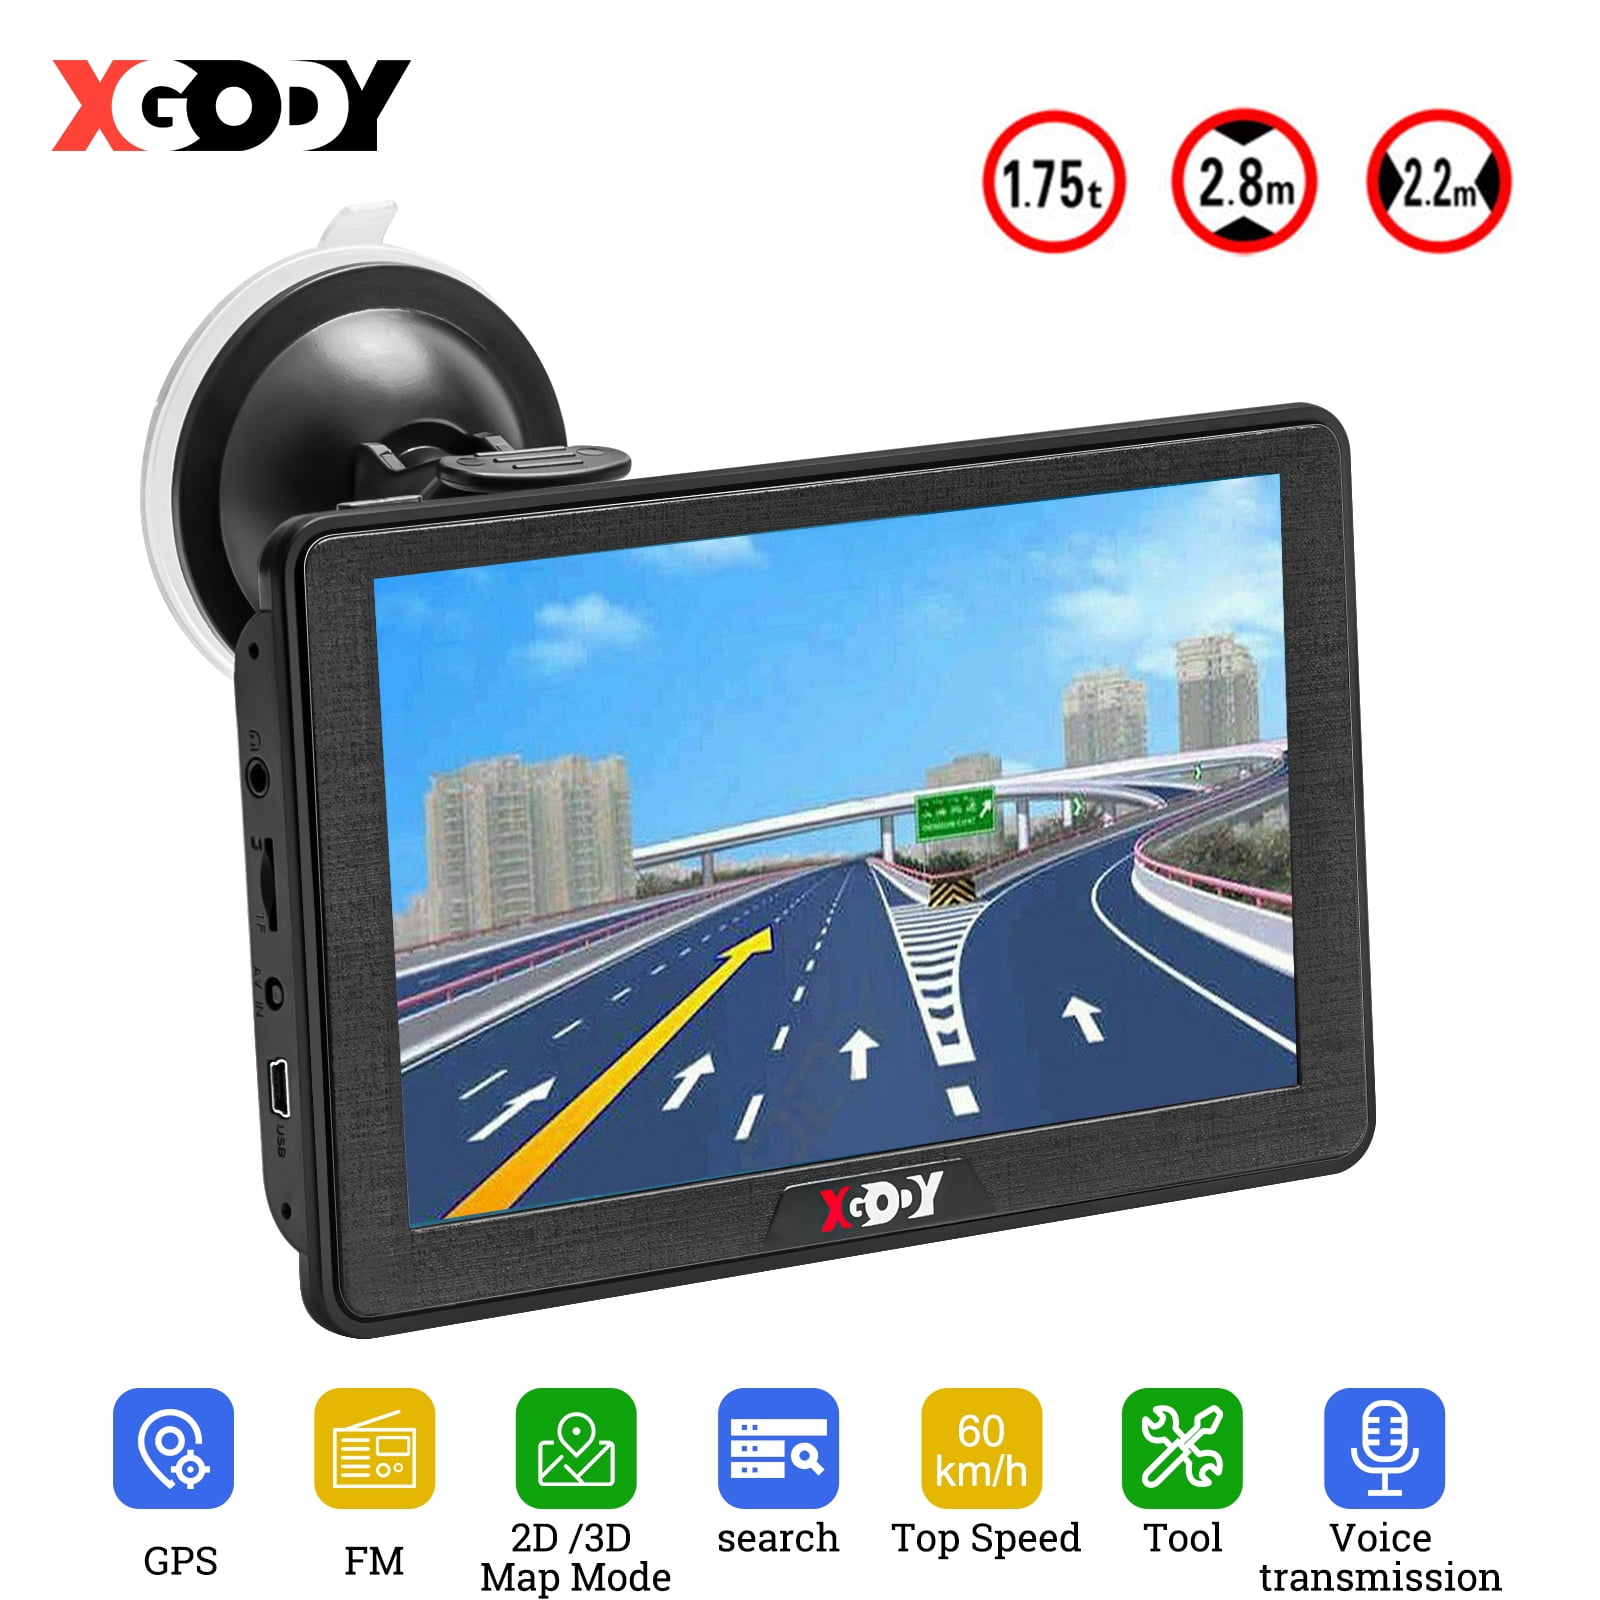 7 inch Truck GPS Navigation for Car 8GB ROM SAT NAV System Navigator for Car Trucks Voice Reported Highway Speed Camera Supported Post Code Favorites & Address Search 